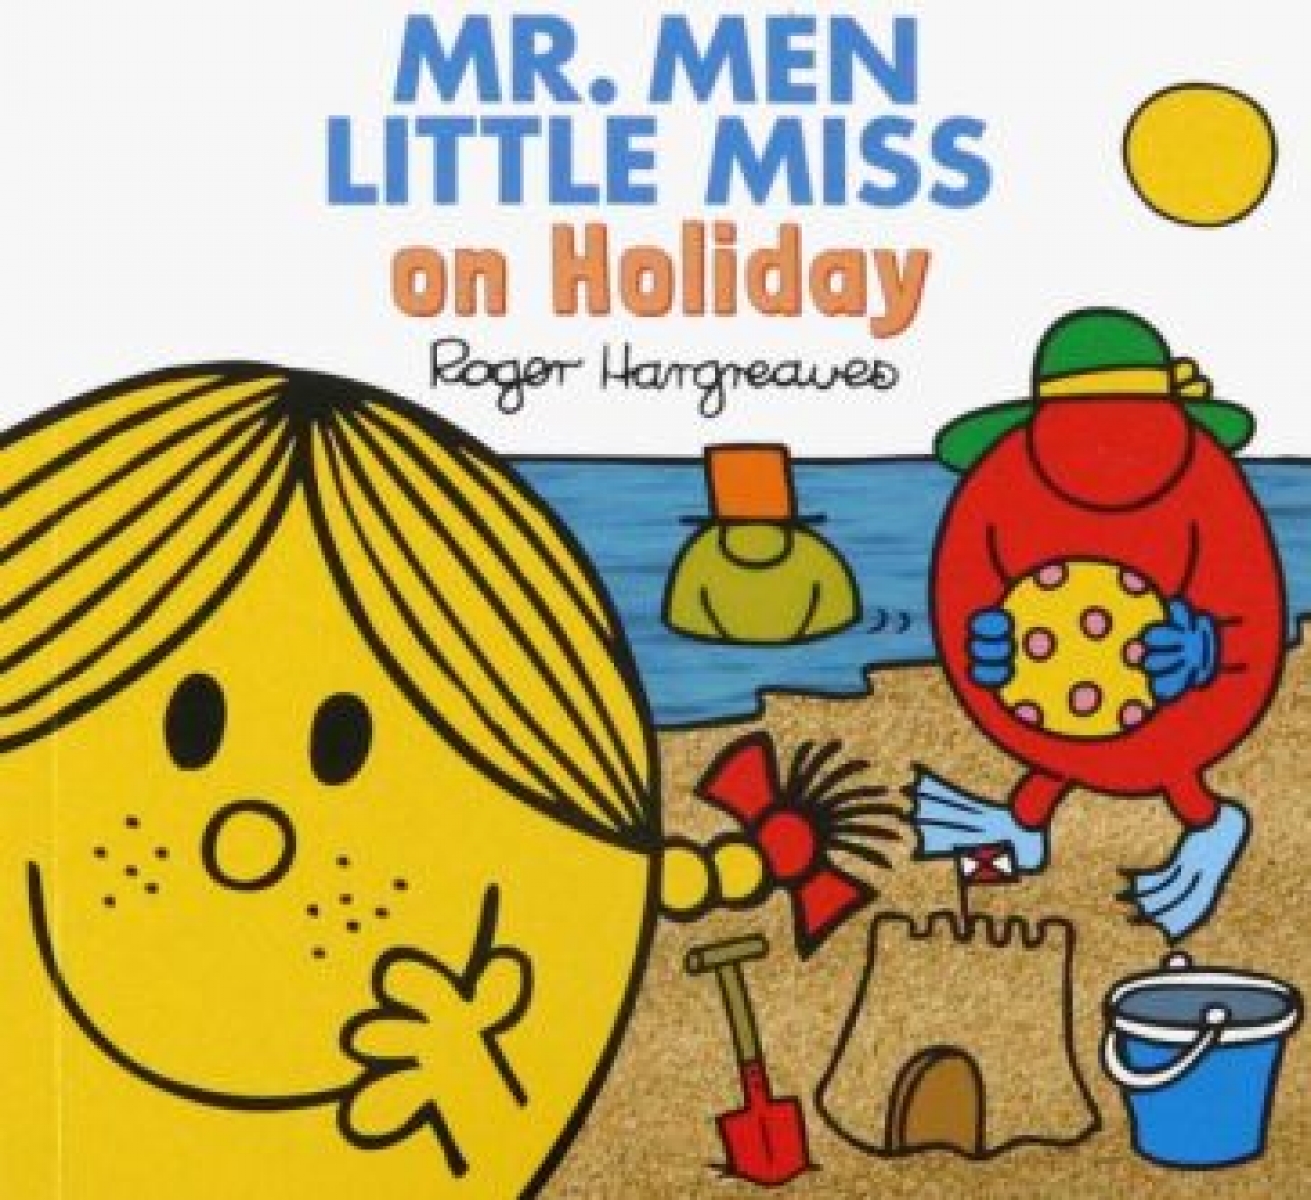 Hargreaves Adam Mr. Men Little Miss on Holiday 